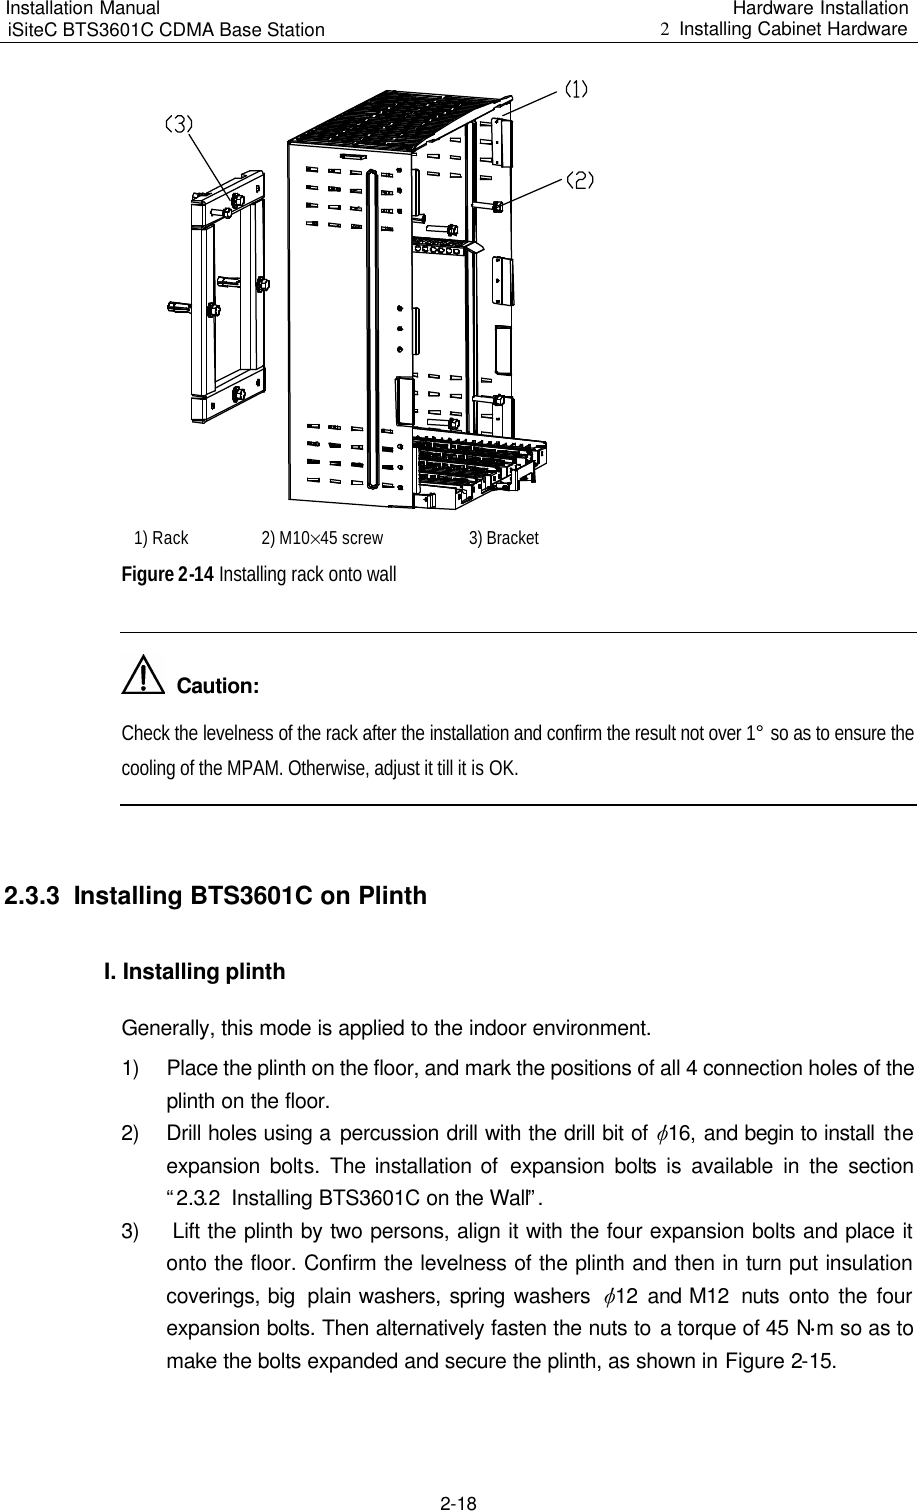 Installation Manual   iSiteC BTS3601C CDMA Base Station Hardware Installation 2  Installing Cabinet Hardware  2-18   1) Rack 2) M10%45 screw  3) Bracket  Figure 2-14 Installing rack onto wall    Caution: Check the levelness of the rack after the installation and confirm the result not over 1° so as to ensure the cooling of the MPAM. Otherwise, adjust it till it is OK.   2.3.3  Installing BTS3601C on Plinth I. Installing plinth  Generally, this mode is applied to the indoor environment.  1) Place the plinth on the floor, and mark the positions of all 4 connection holes of the plinth on the floor.  2) Drill holes using a percussion drill with the drill bit of v16, and begin to install the expansion bolts.  The installation of  expansion bolts is  available in the section “2.3.2  Installing BTS3601C on the Wall”. 3)   Lift the plinth by two persons, align it with the four expansion bolts and place it onto the floor. Confirm the levelness of the plinth and then in turn put insulation coverings, big  plain washers, spring washers  v12  and M12  nuts  onto the four expansion bolts. Then alternatively fasten the nuts to a torque of 45 N$m so as to make the bolts expanded and secure the plinth, as shown in Figure 2-15.  